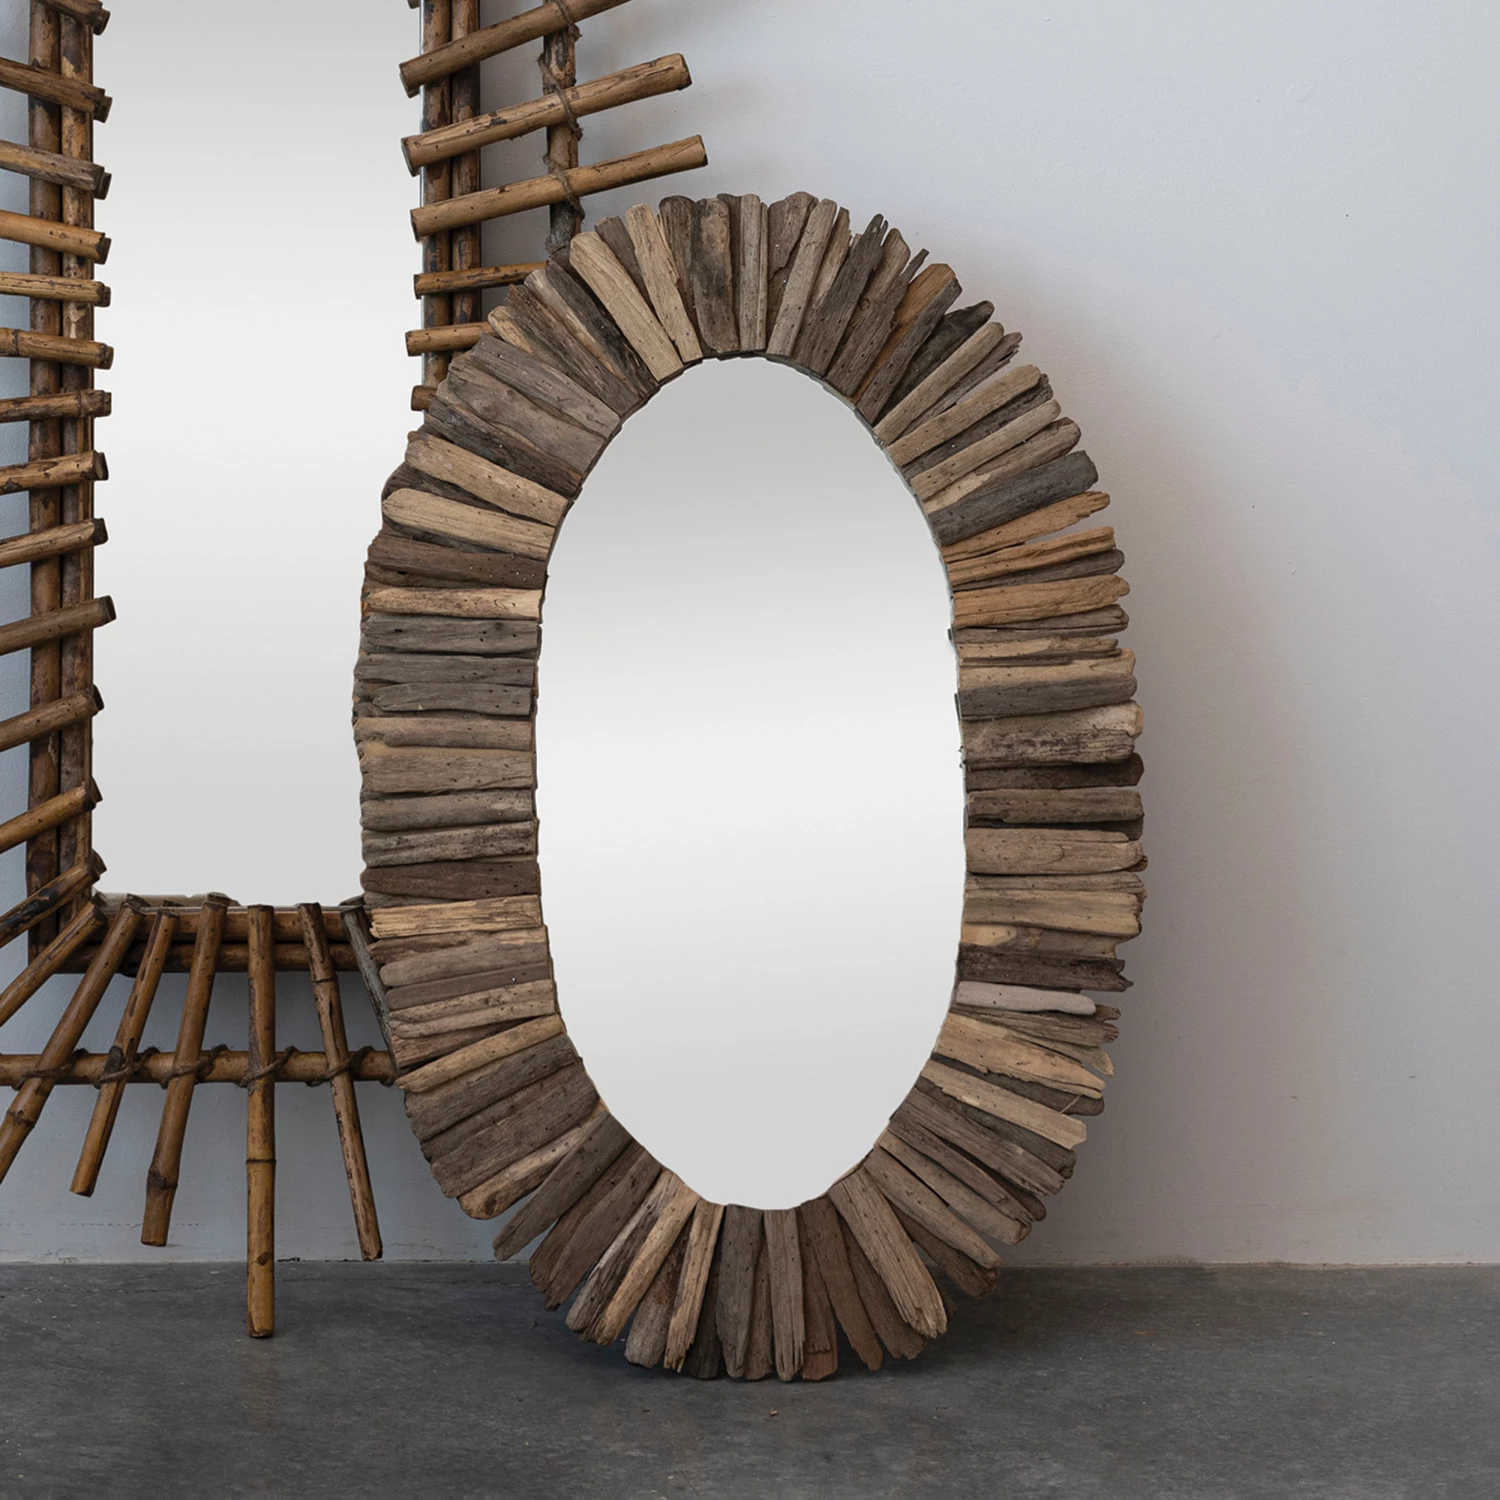 Driftwood Round Oval Wall Mirror - 33-in x 22-in - Mellow Monkey